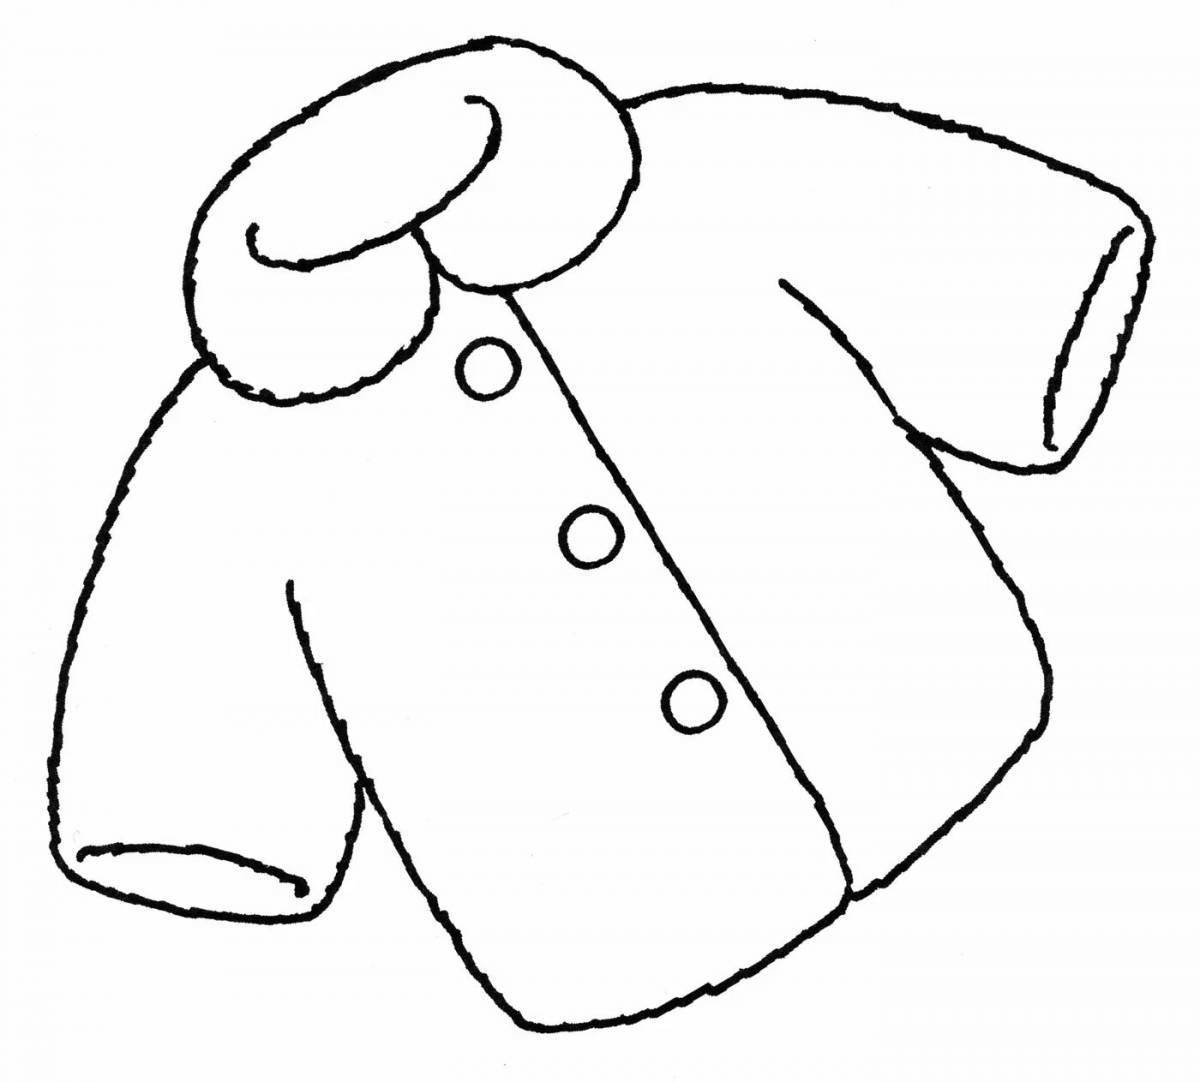 Coloring page of a colorful coat